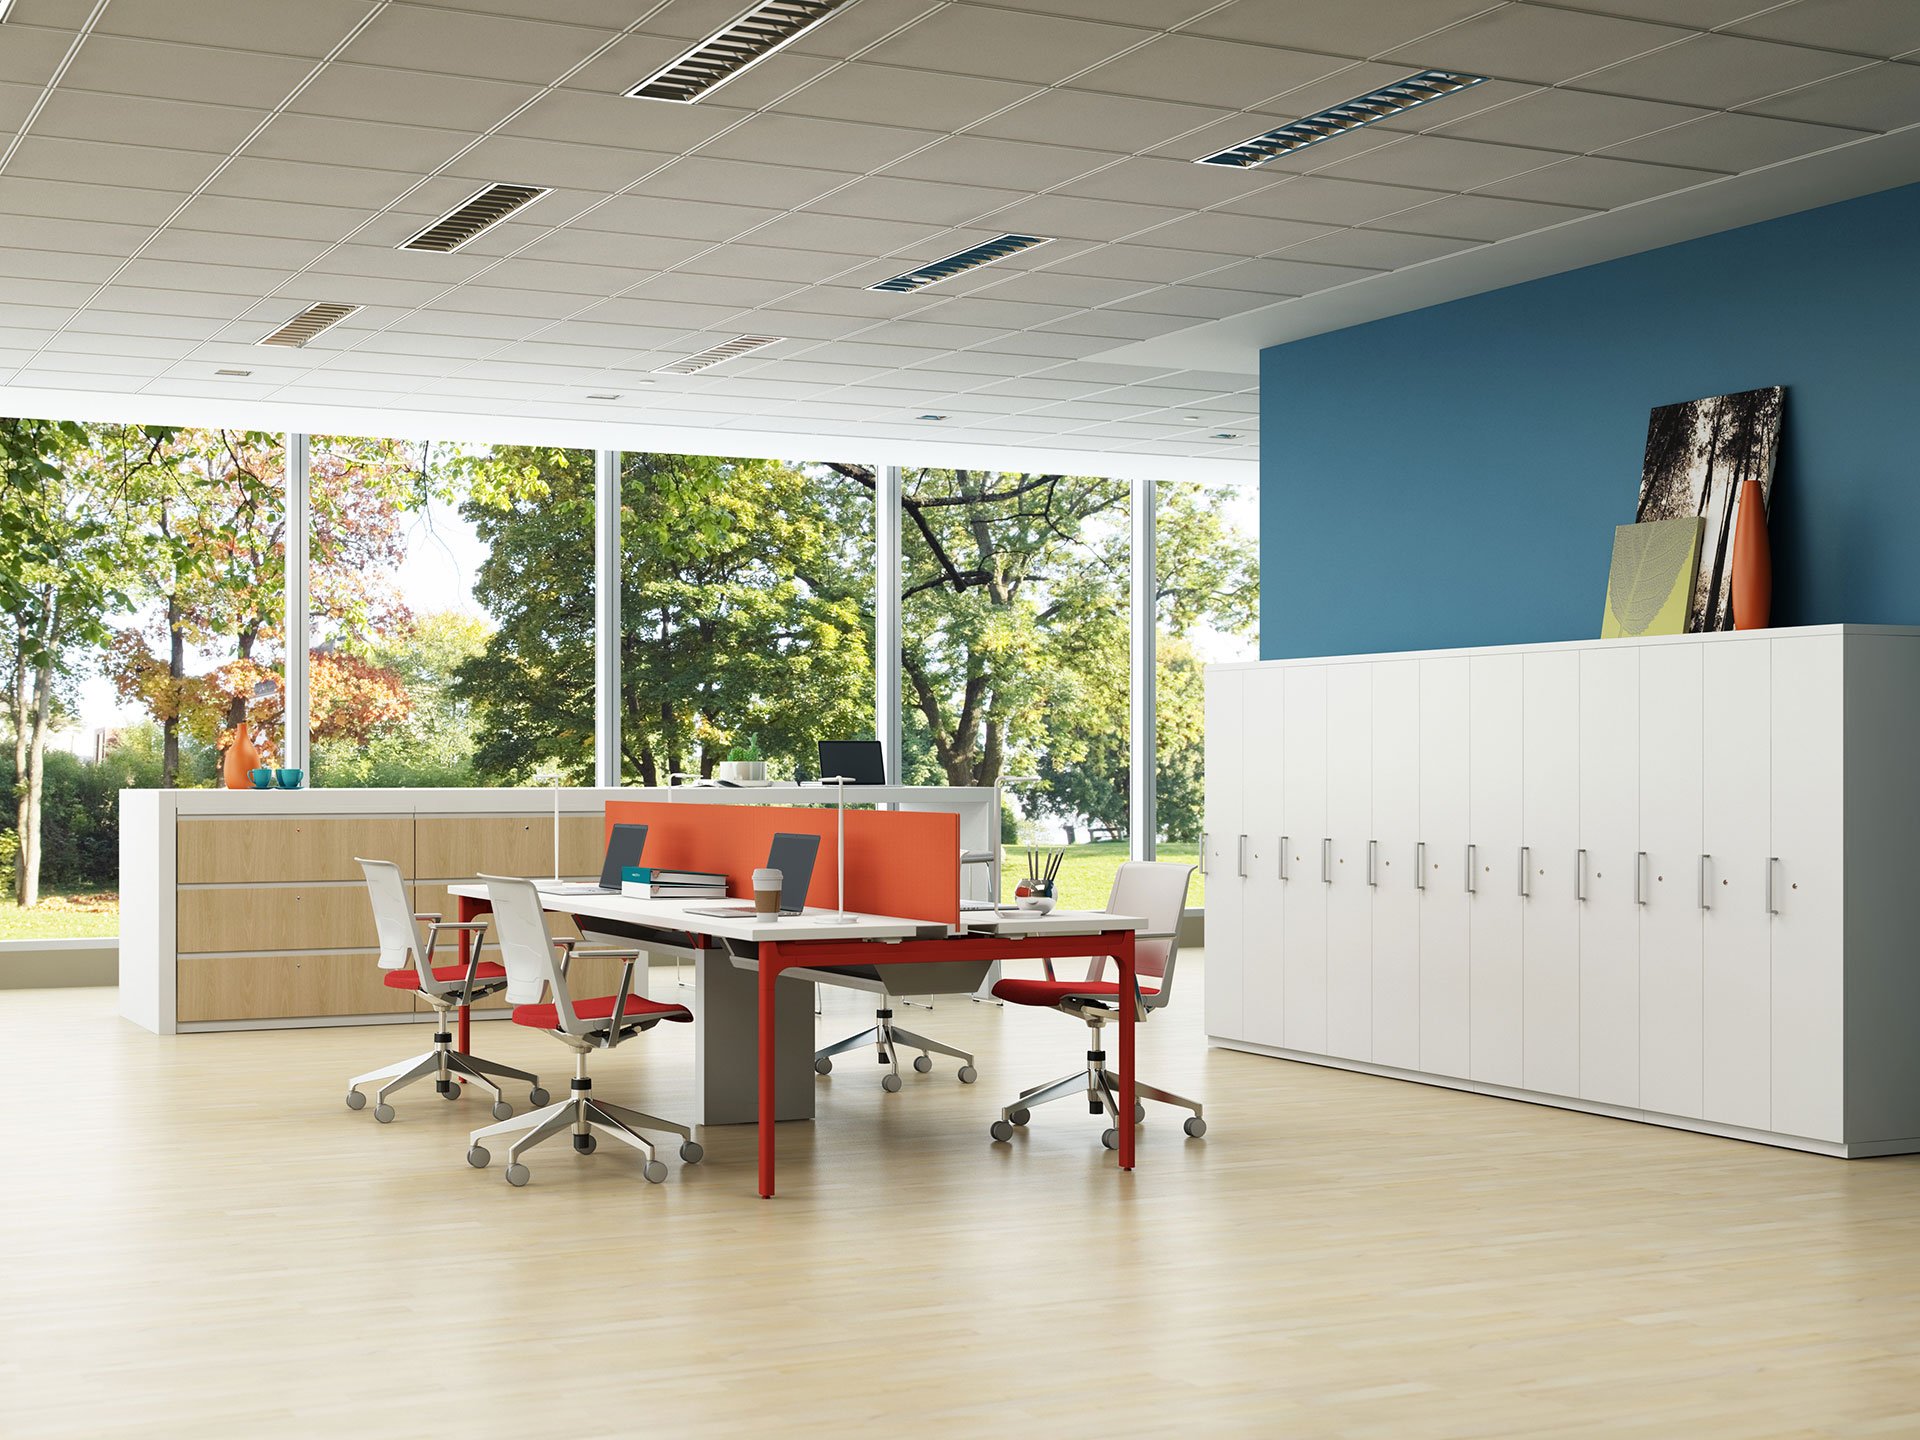 Haworth X Series Desks in open office space with center divider for privacy and laptops at desk with open window concept around office